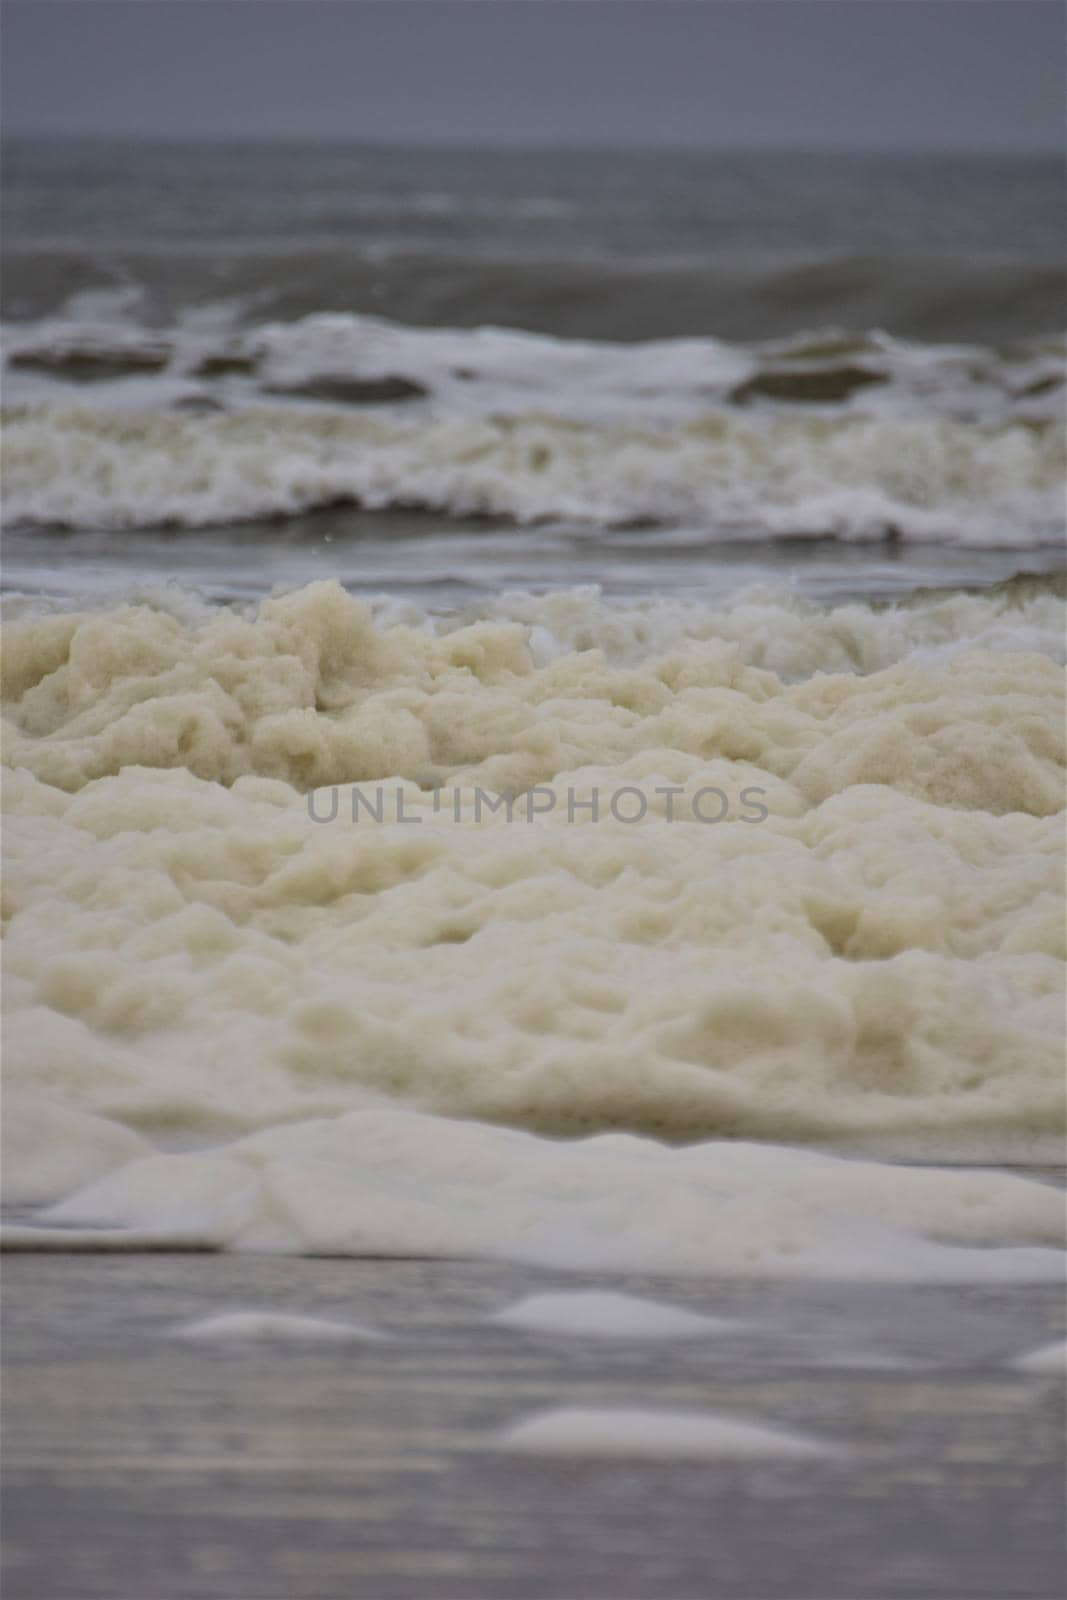 Waves and sea foam on a beach of the North Sea on a cloudy day by Luise123